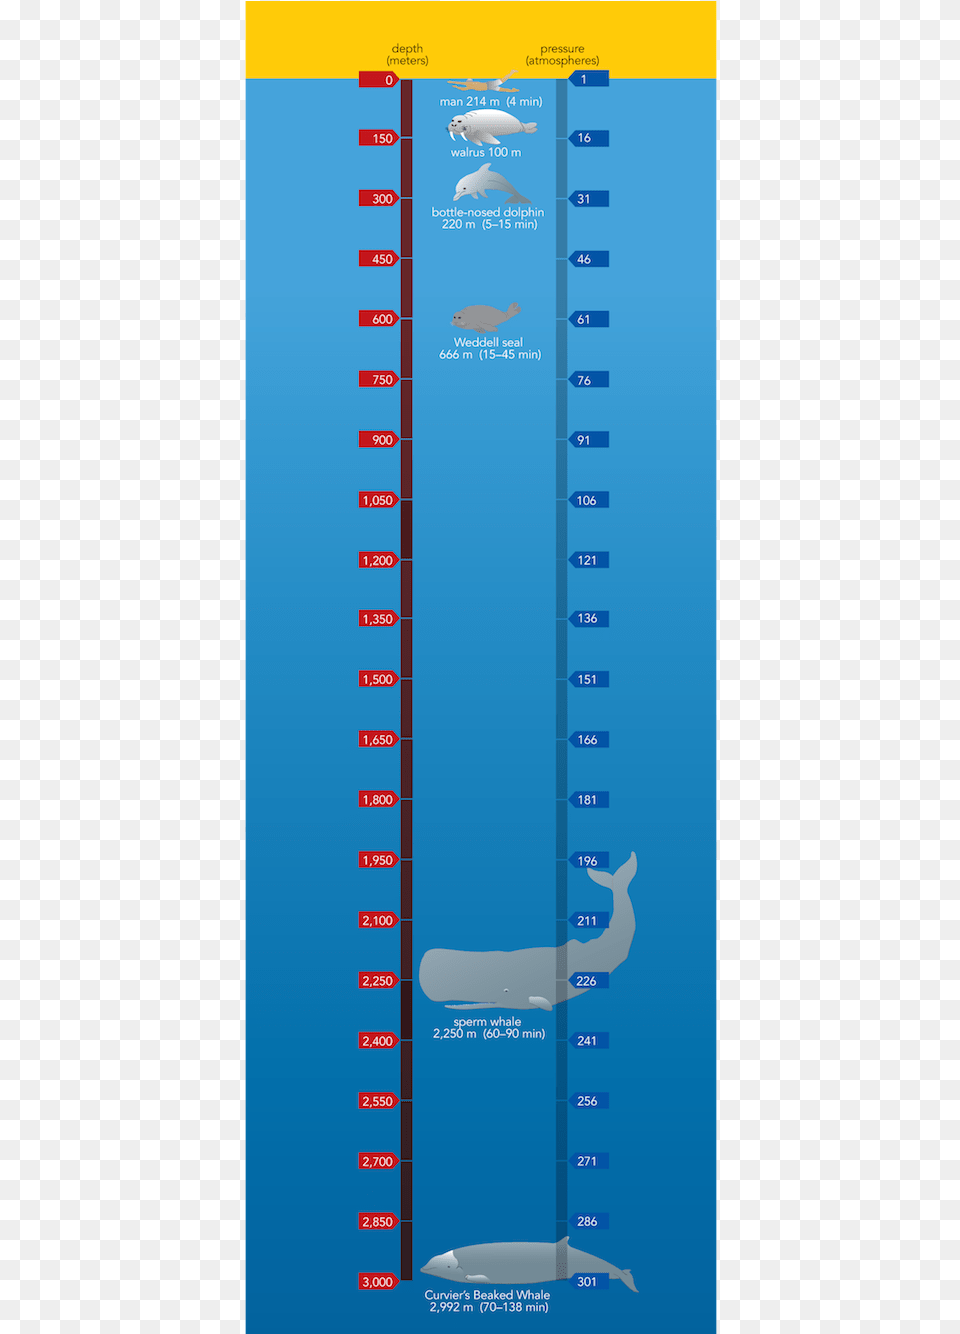 Ltpgtltstronggtsf Fig 9 3 Ltstronggt Diving Ruler, Chart, Plot, Water Png Image